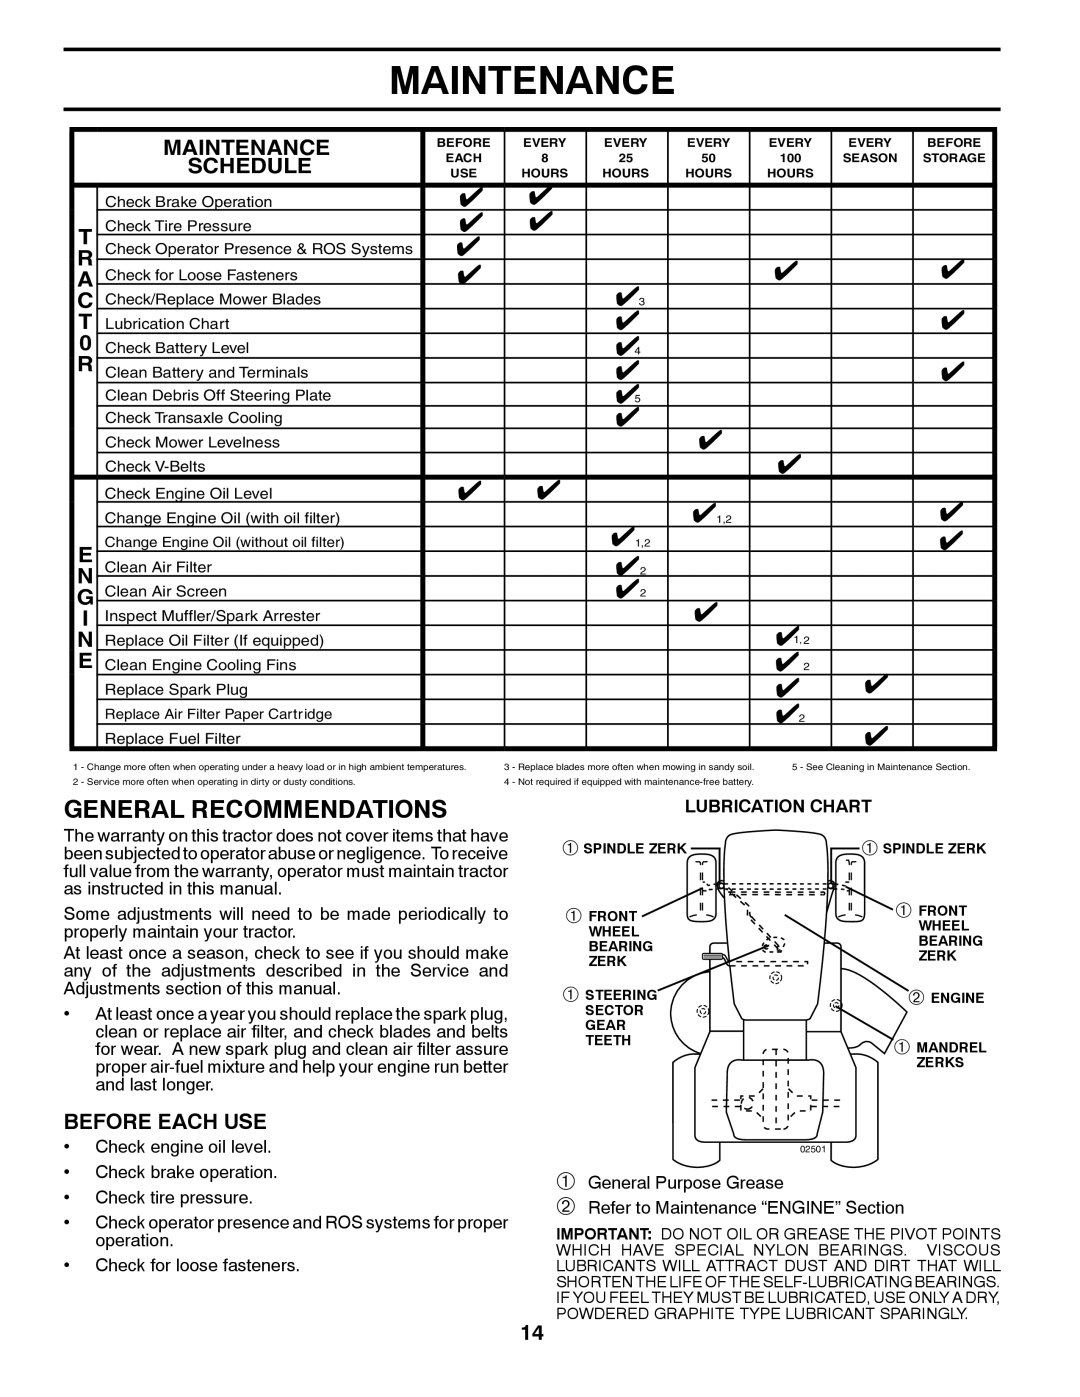 Husqvarna YTH23V48 owner manual General Recommendations, Maintenance, Schedule, Before Each USE, Lubrication Chart 